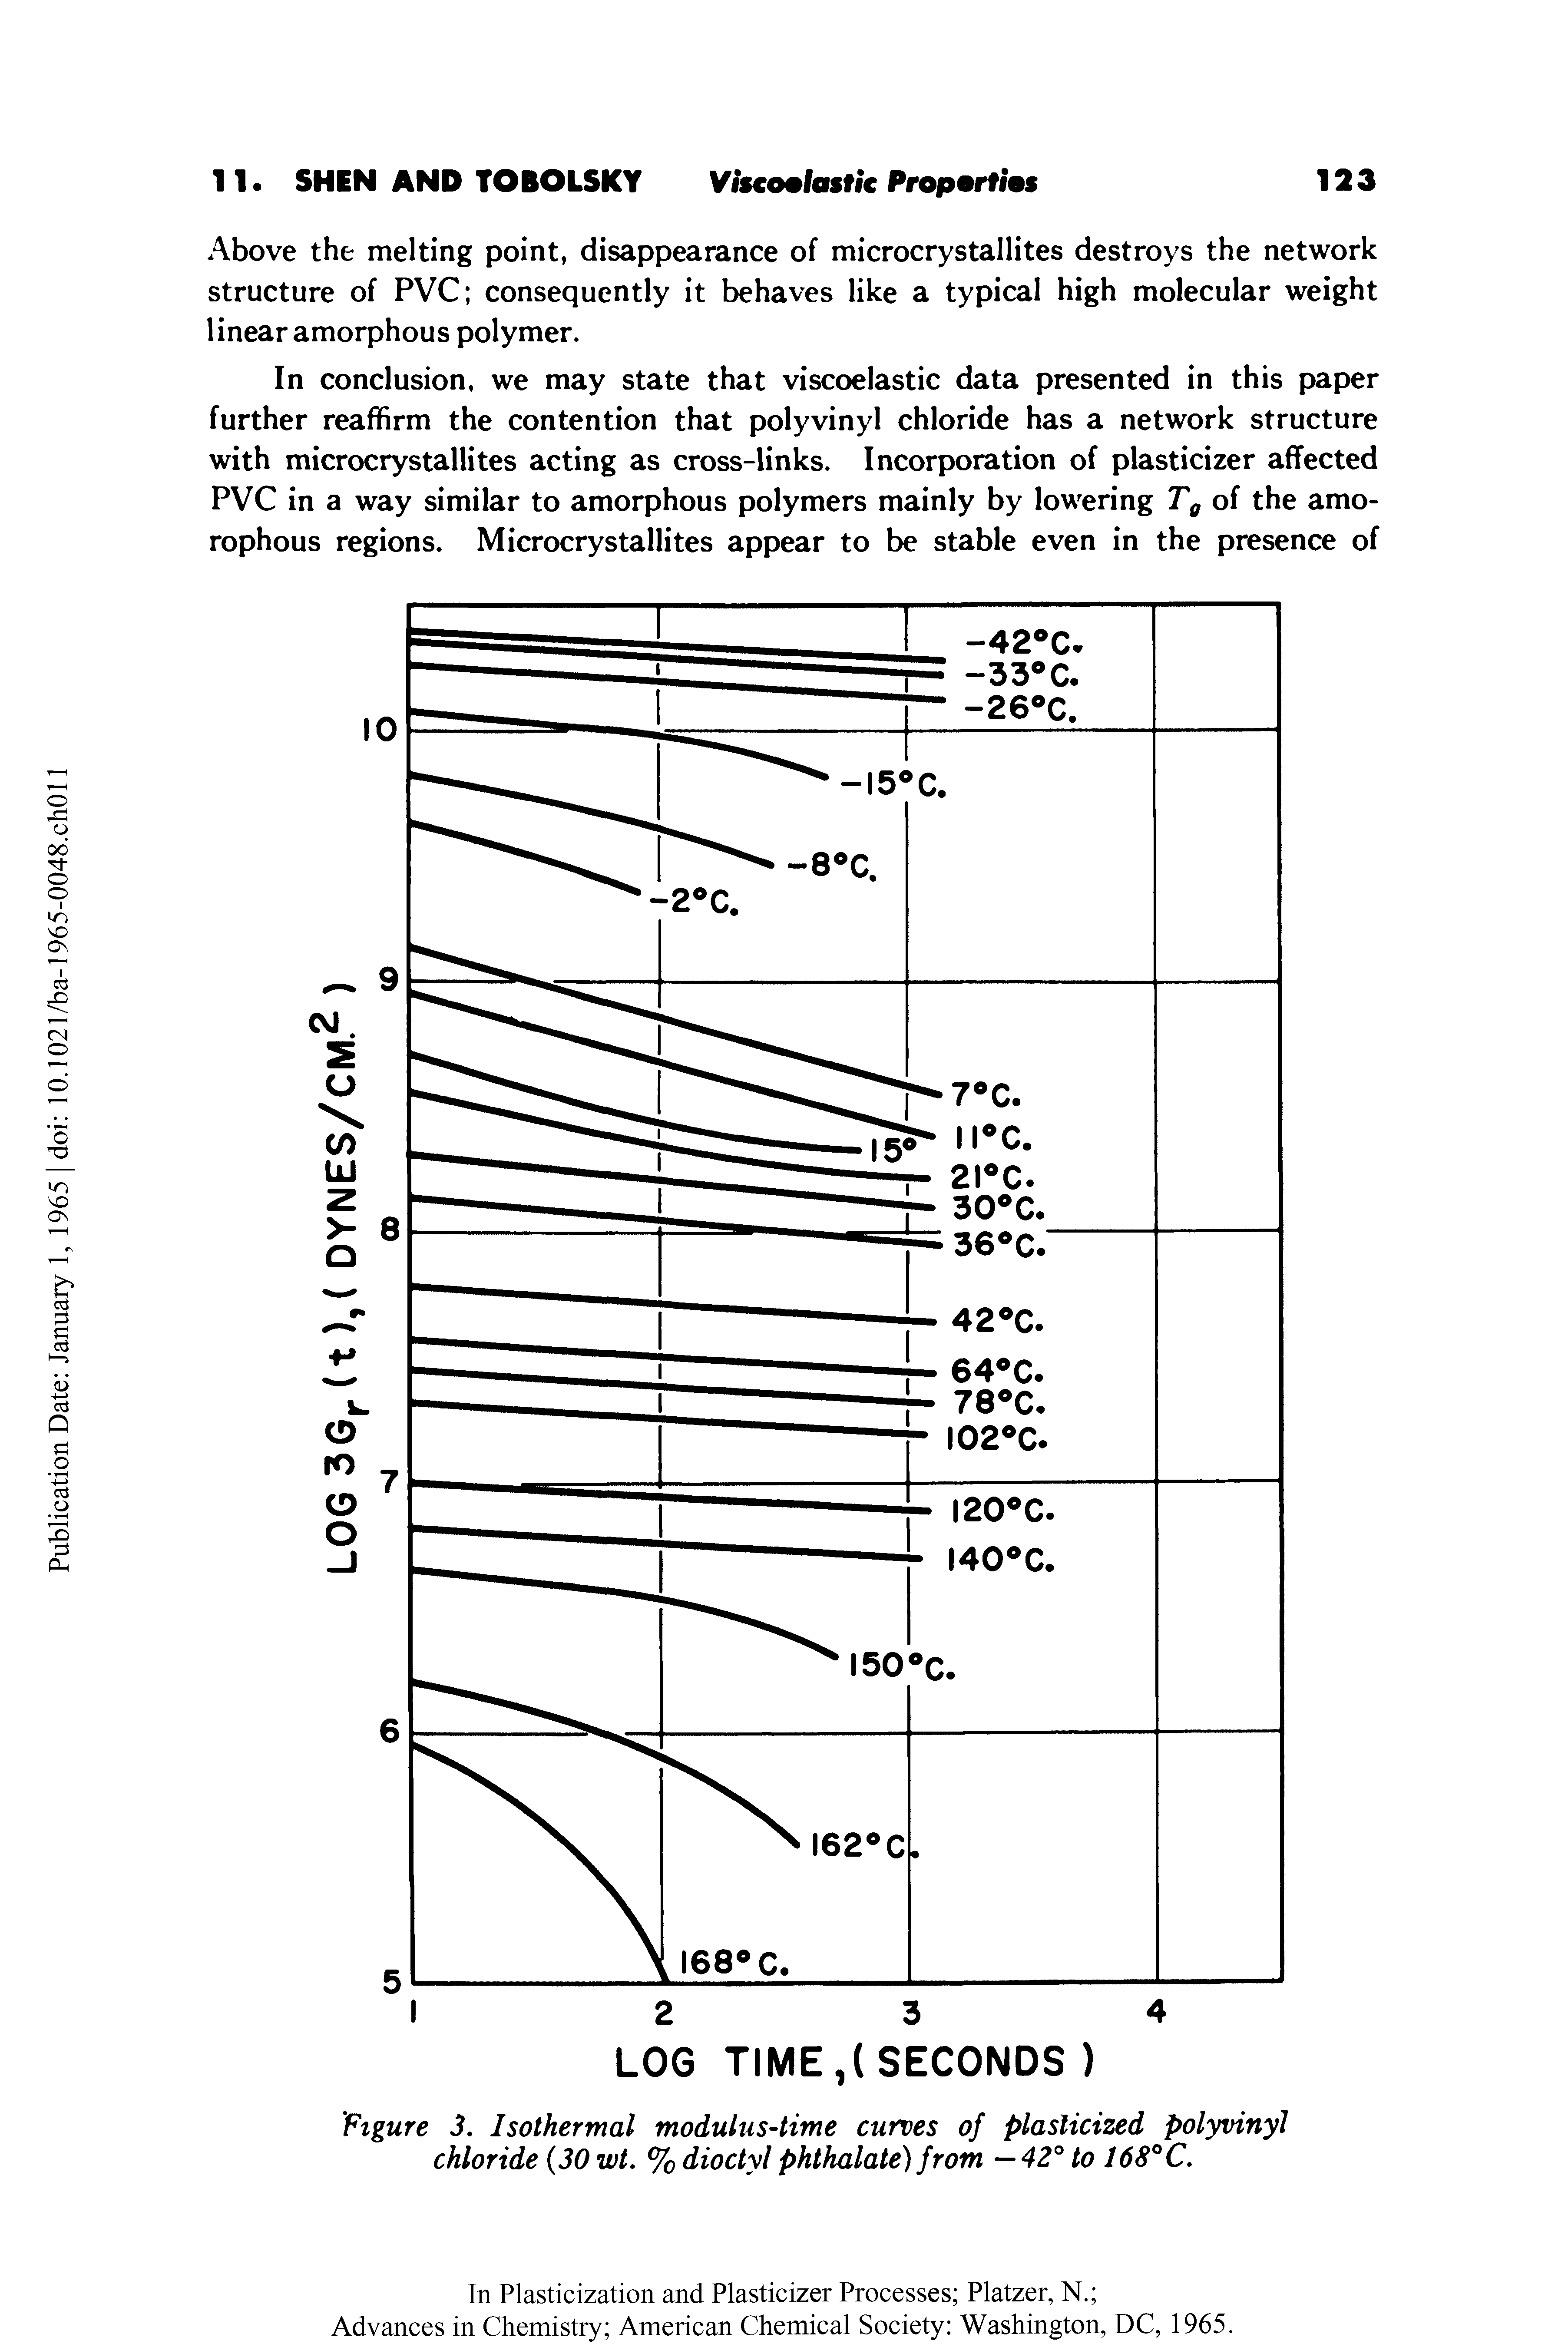 Figure 3. Isothermal modulus-time curves of plasticized polyvinyl chloride (30 wt. % dioctyl phthalate) from —42° to 168°C.